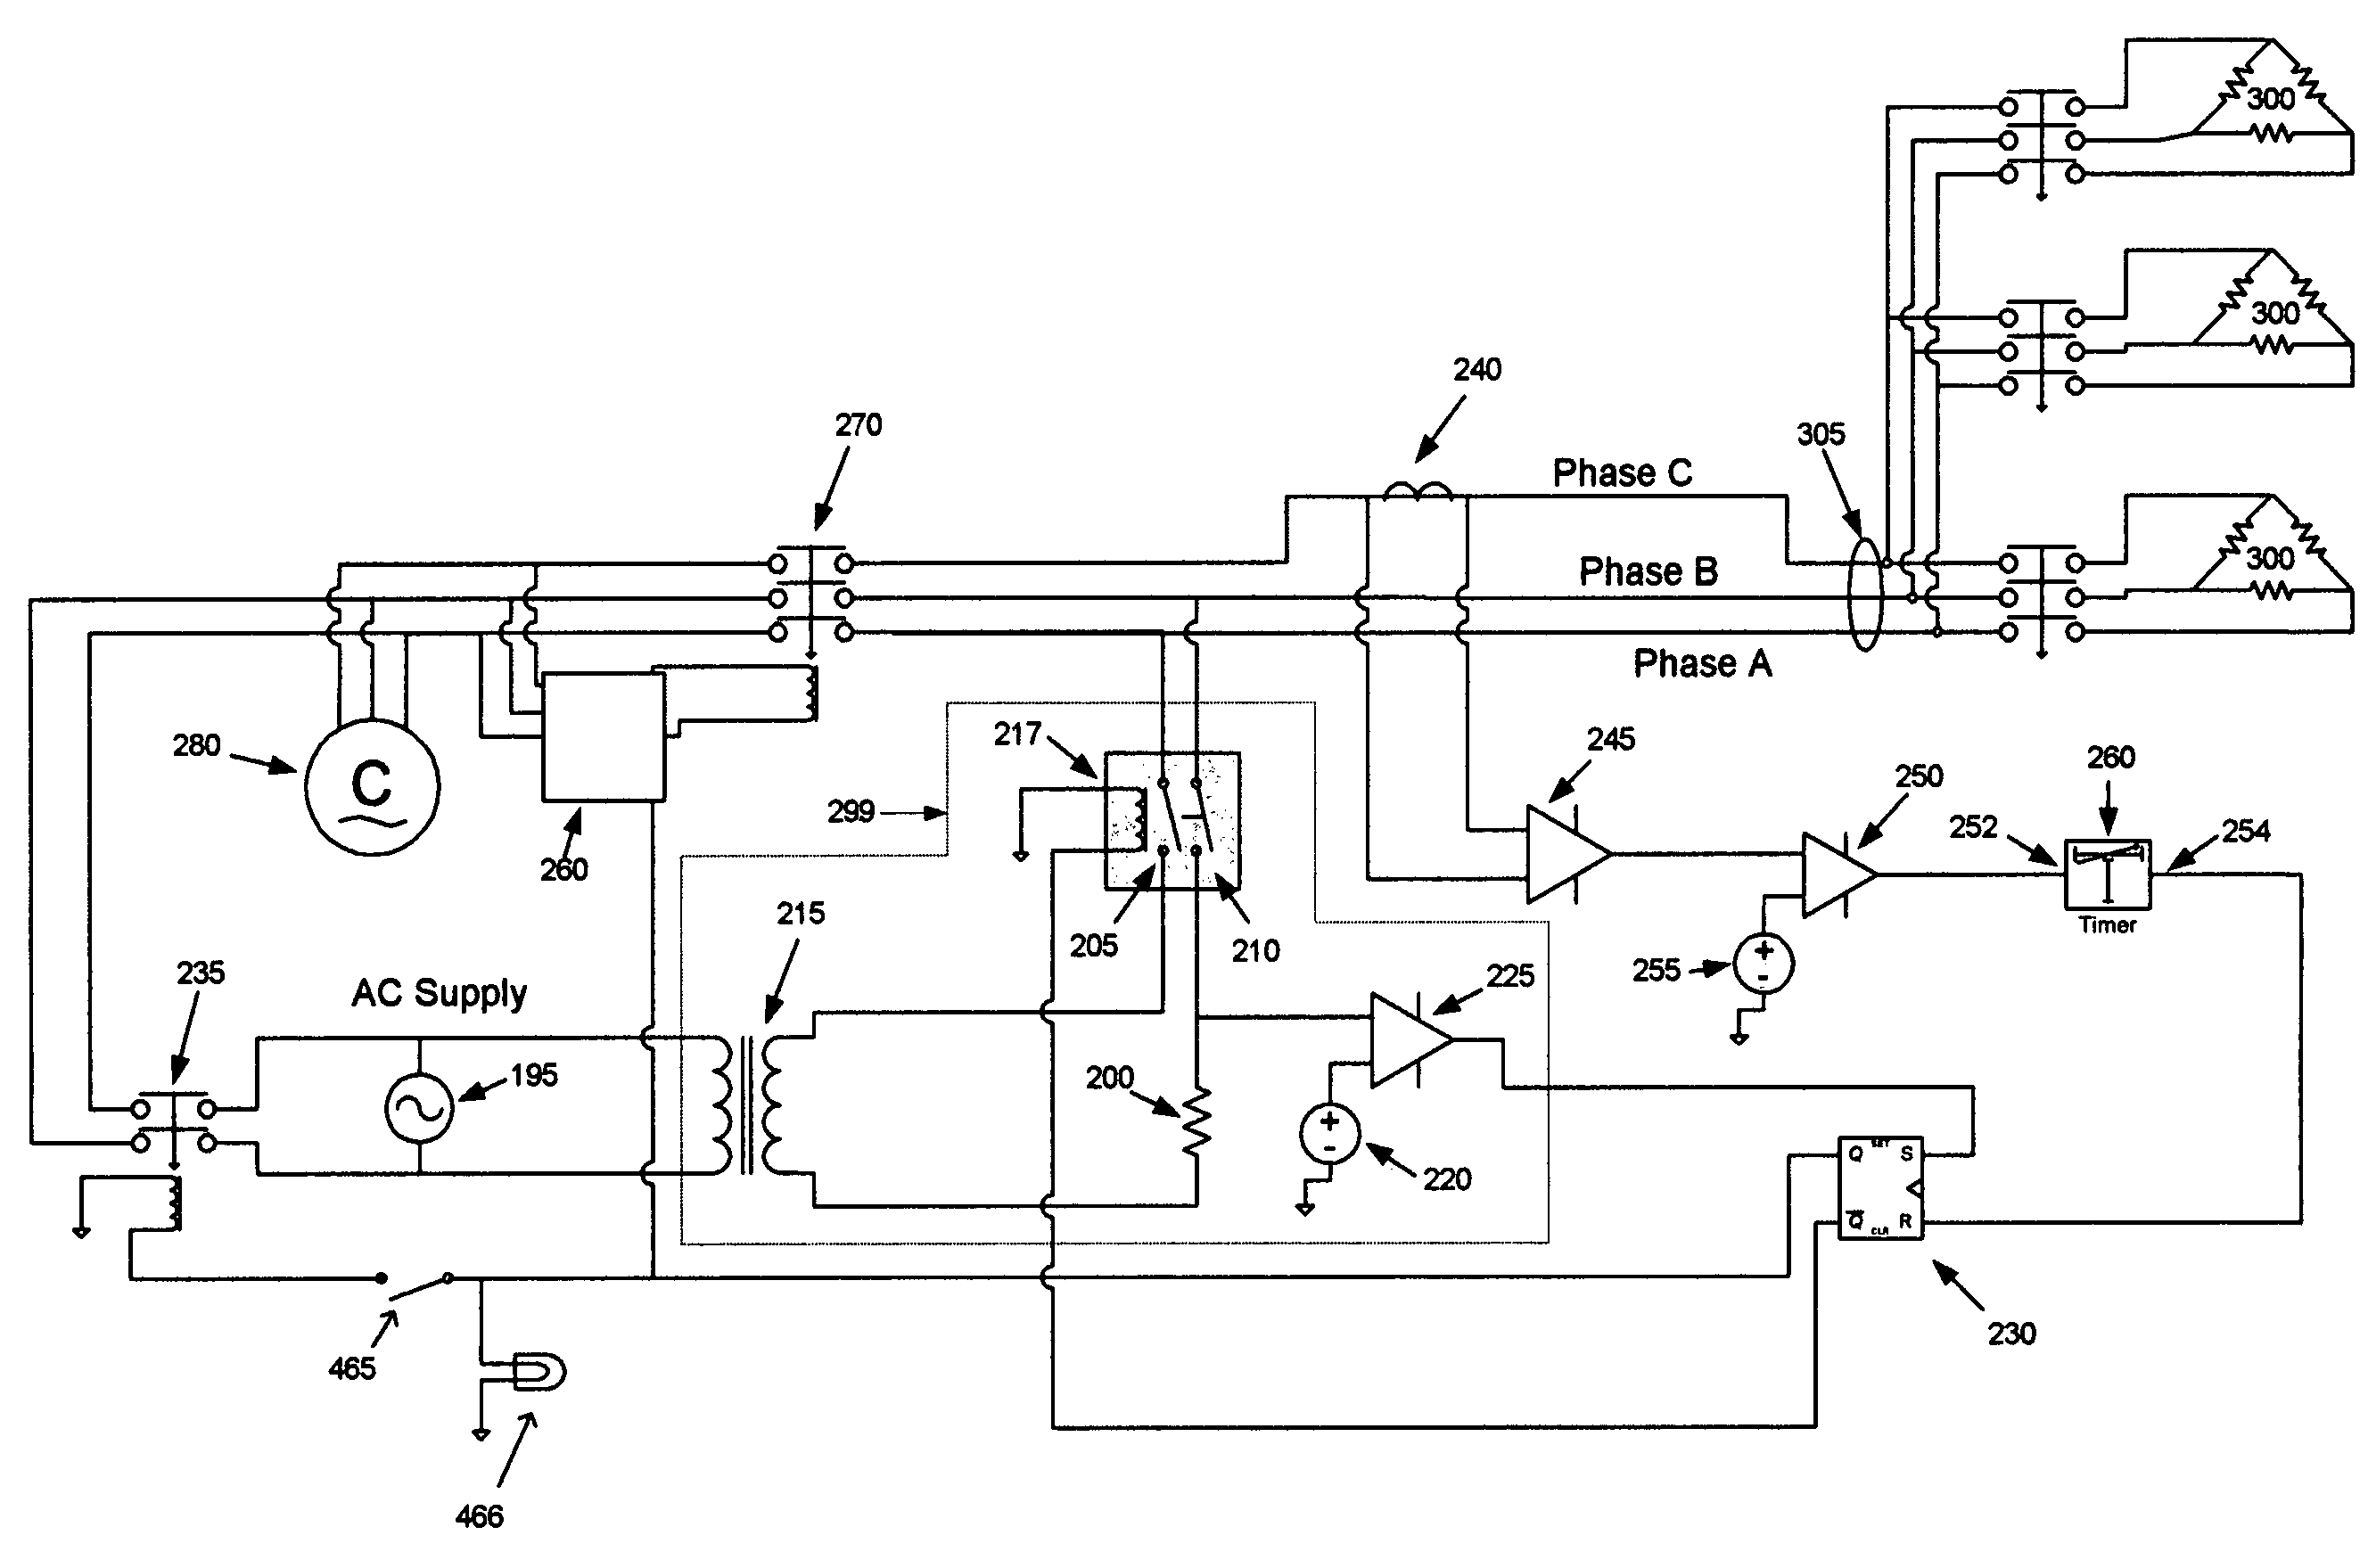 Automatic phase converter